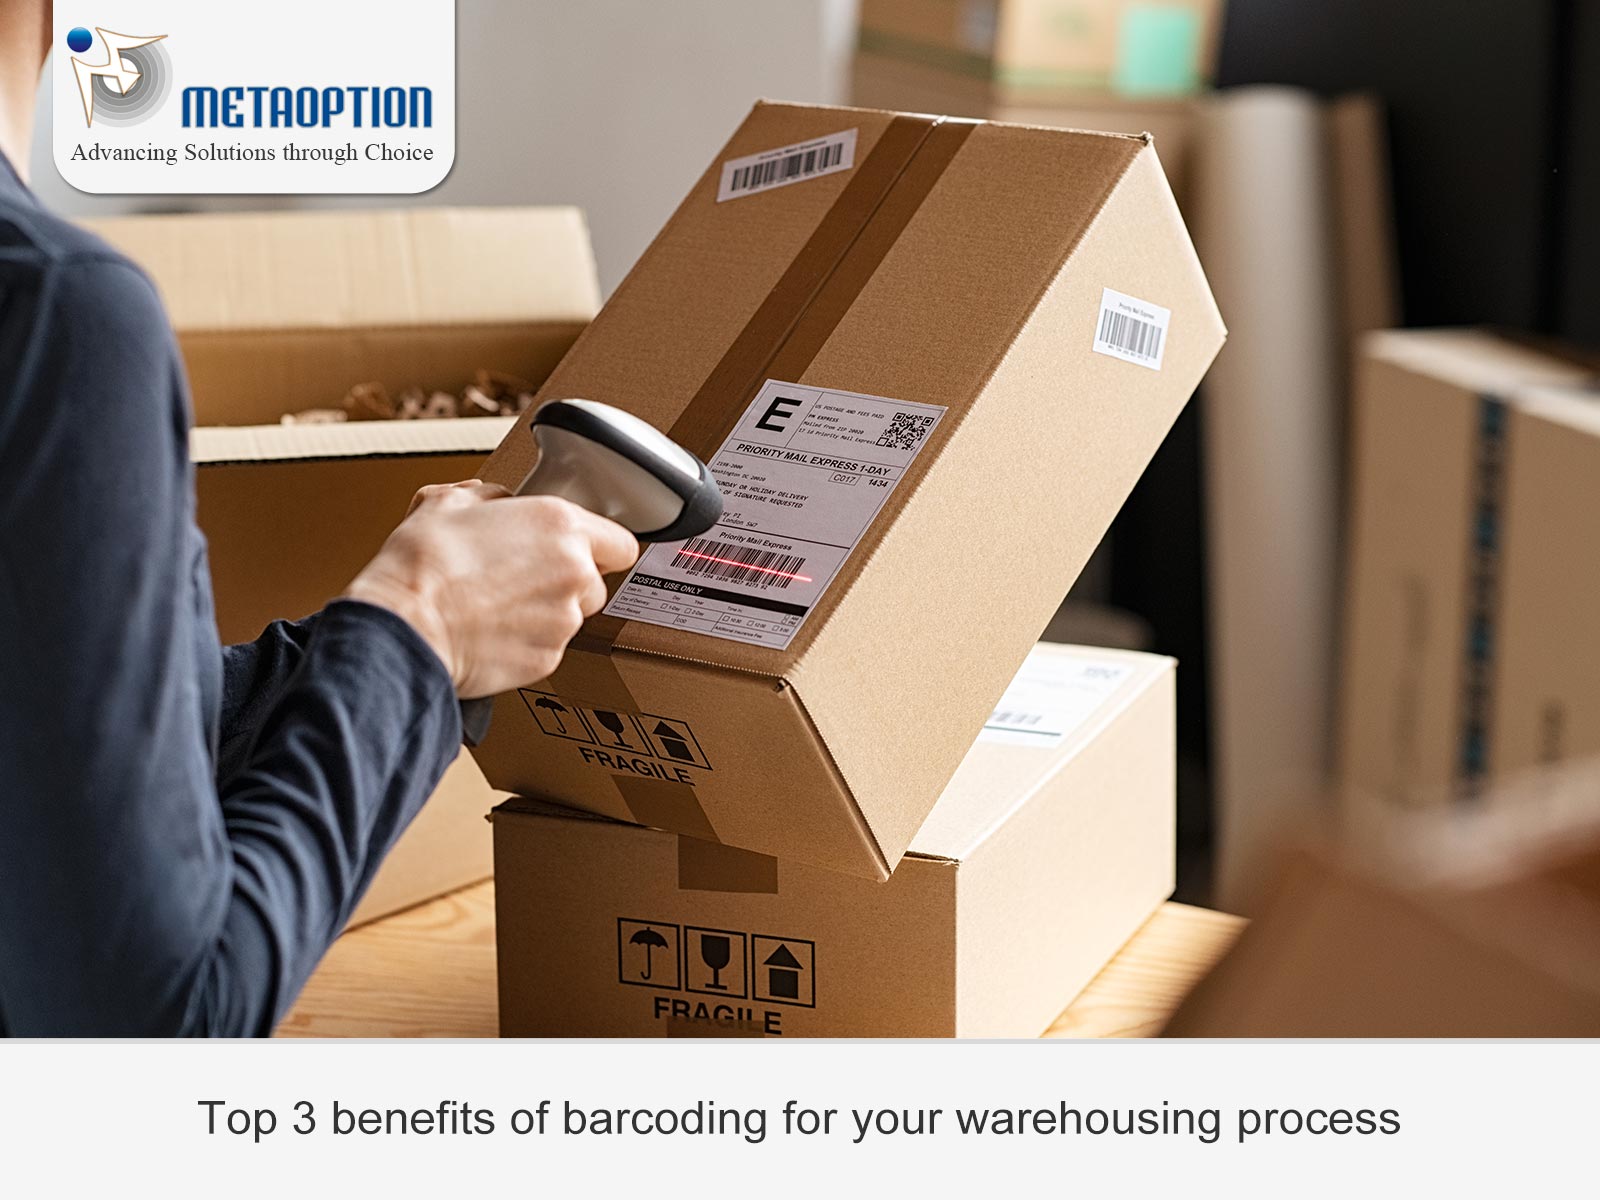 Top 3 benefits of barcoding for your warehousing process